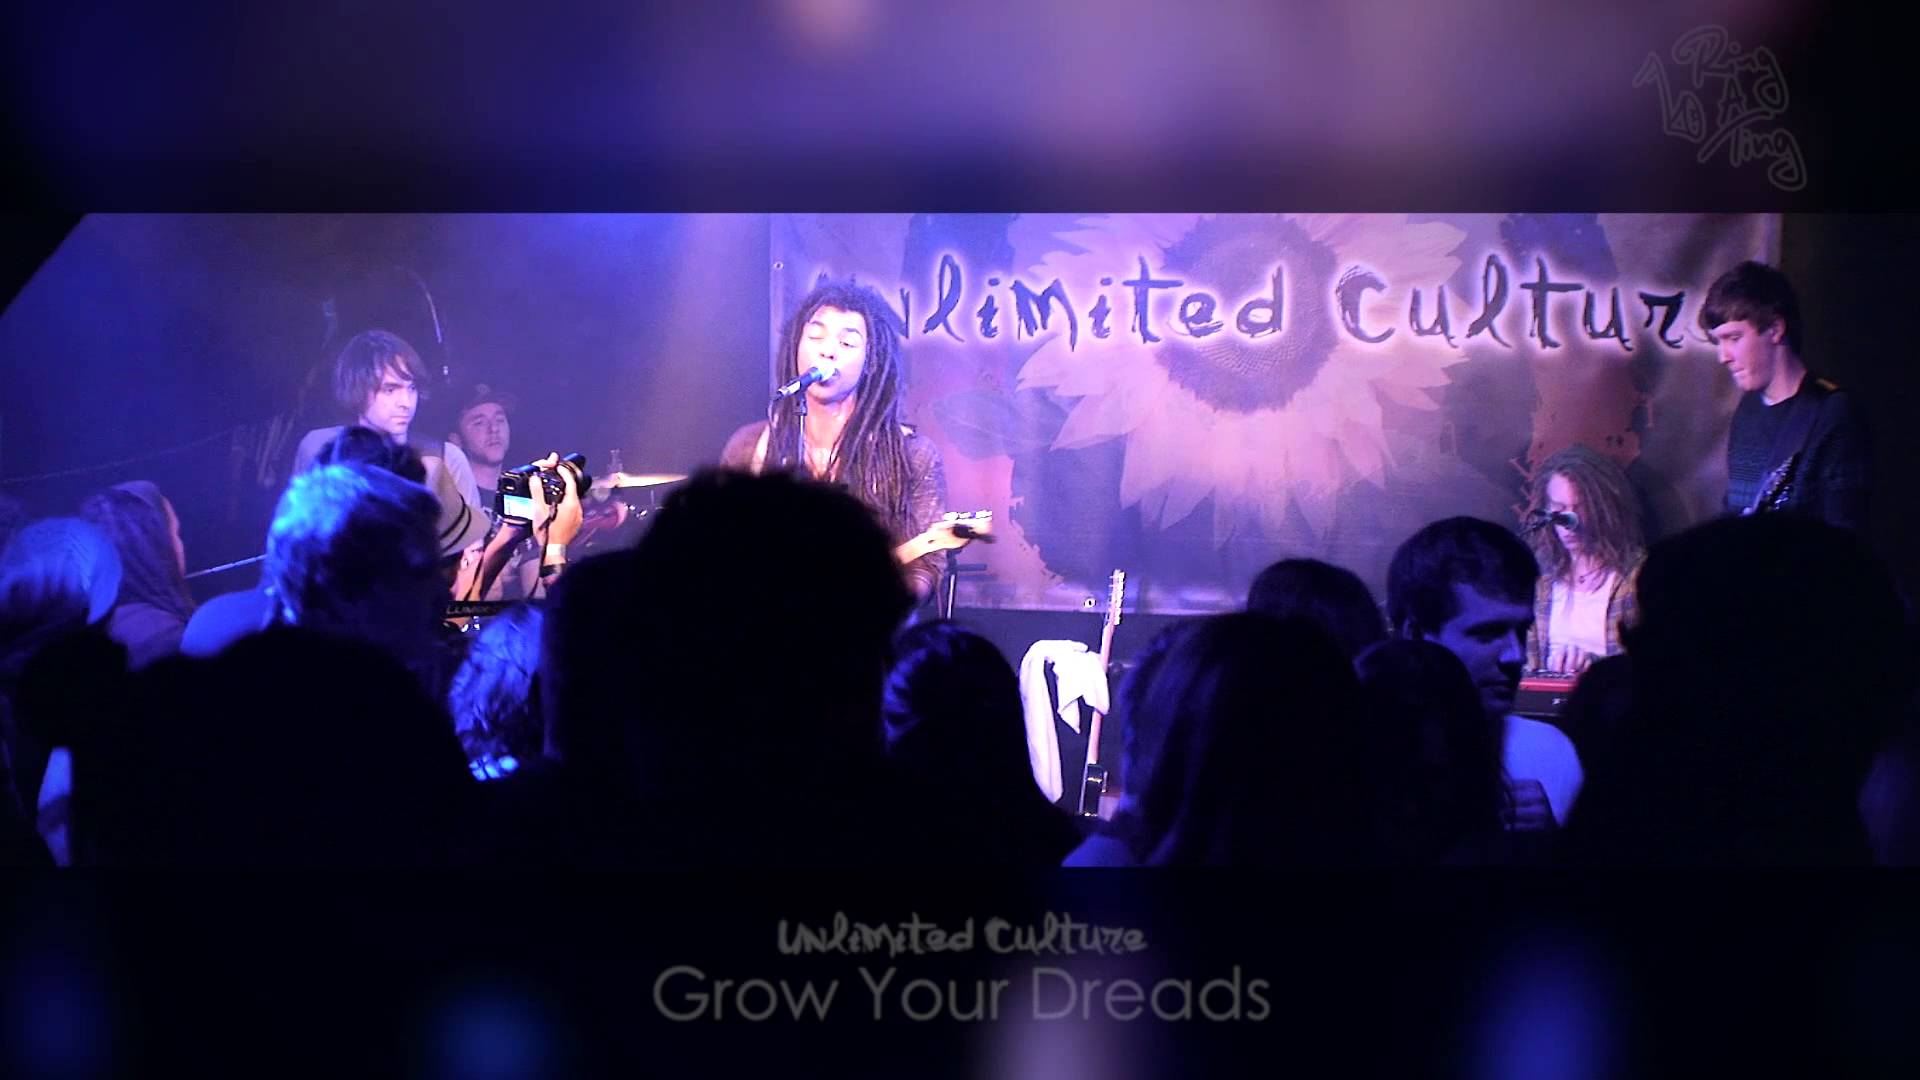 Unlimited Culture - Grow Your Dreads in Bamberg, Germany @ Sound n Arts [2/21/2015]